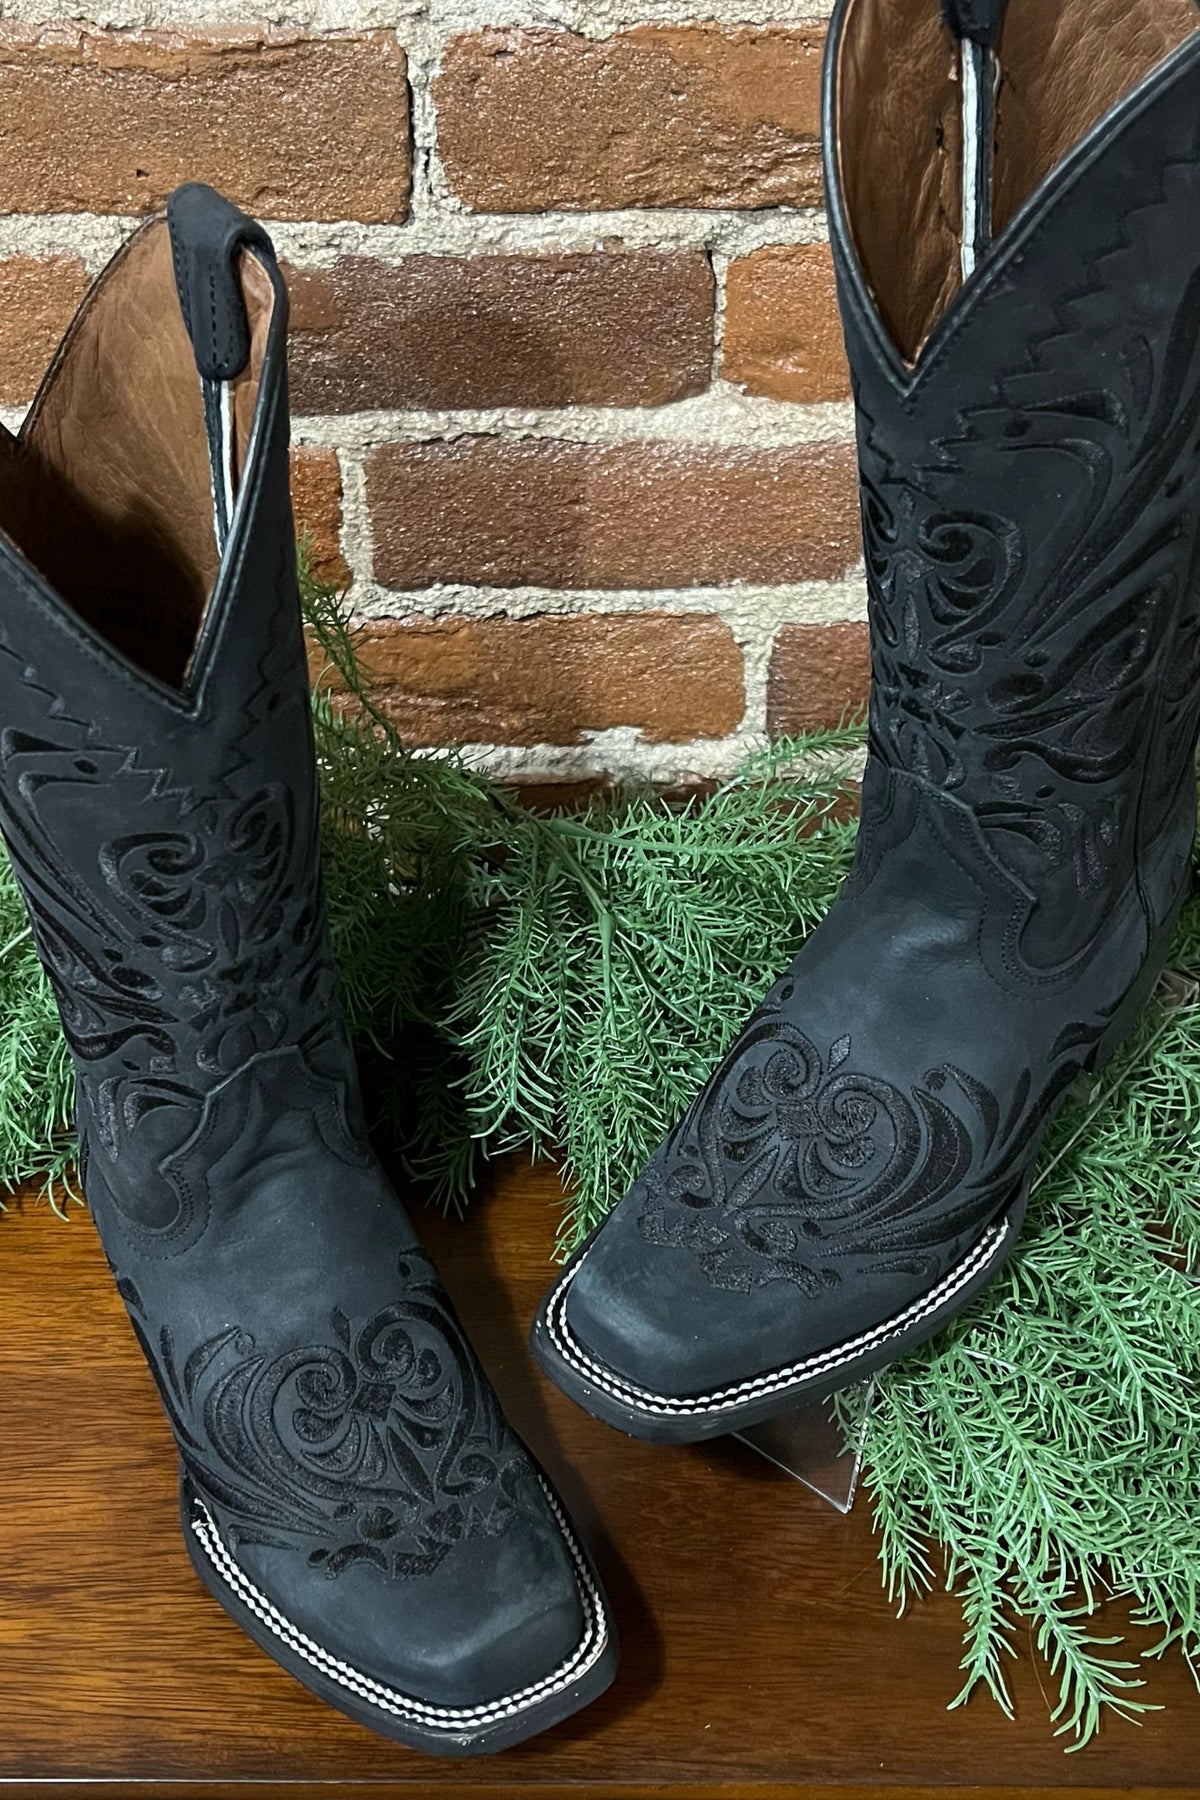 Black Embroidered Boots by Circle G-Women's Boot-Circle G Boots-Gallop 'n Glitz- Women's Western Wear Boutique, Located in Grants Pass, Oregon